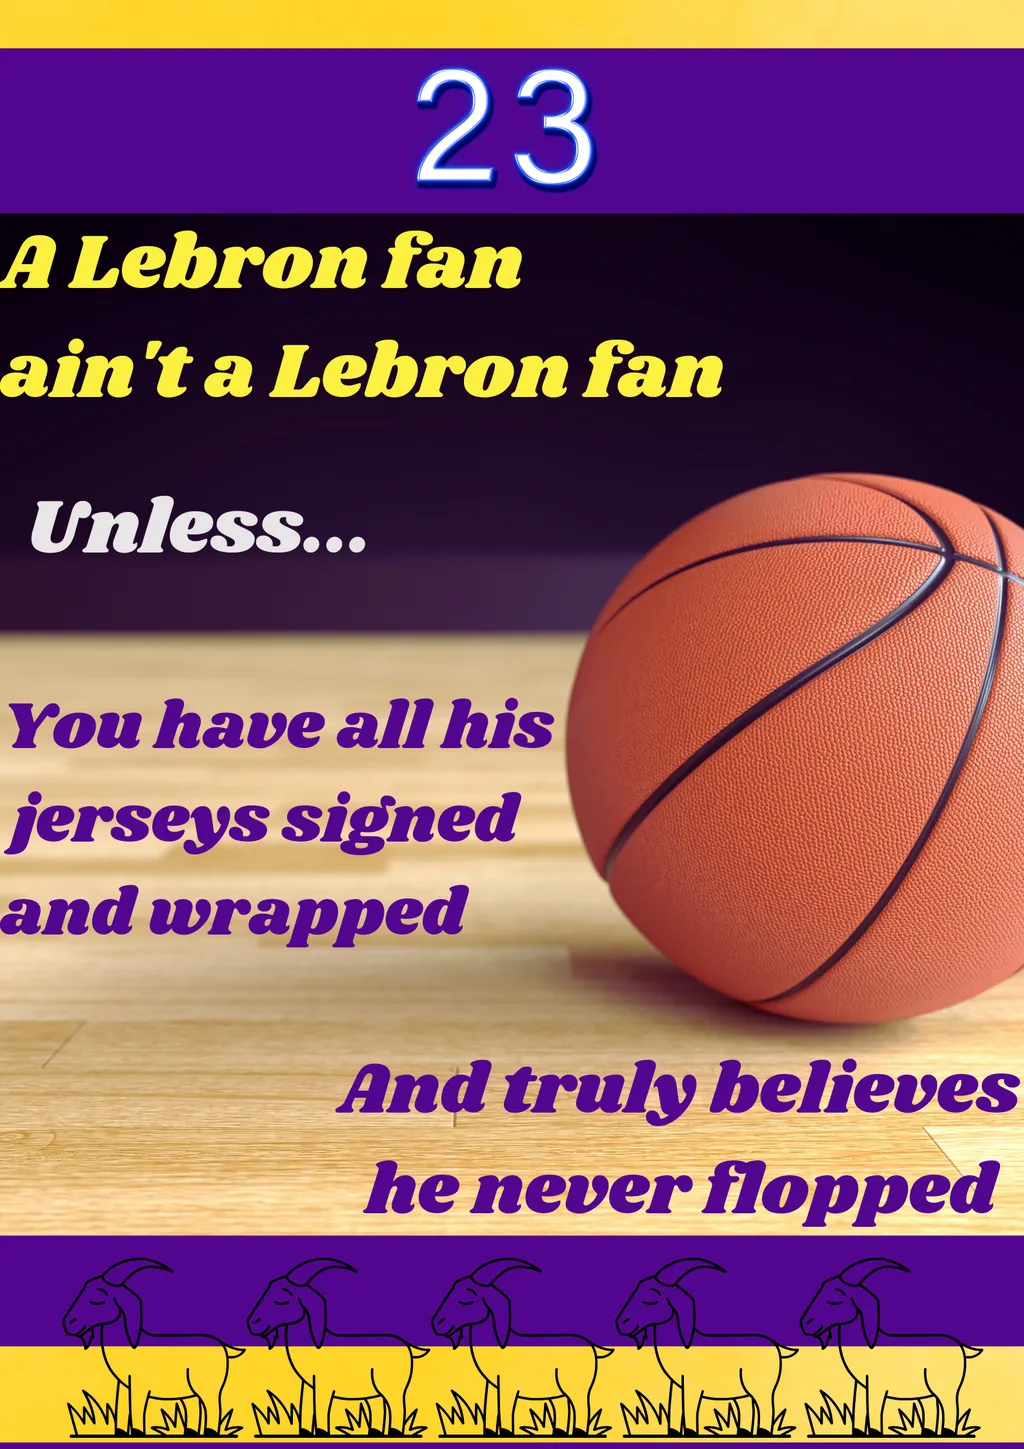 A Dose of Wittezism: A Lebron Fan (bow)